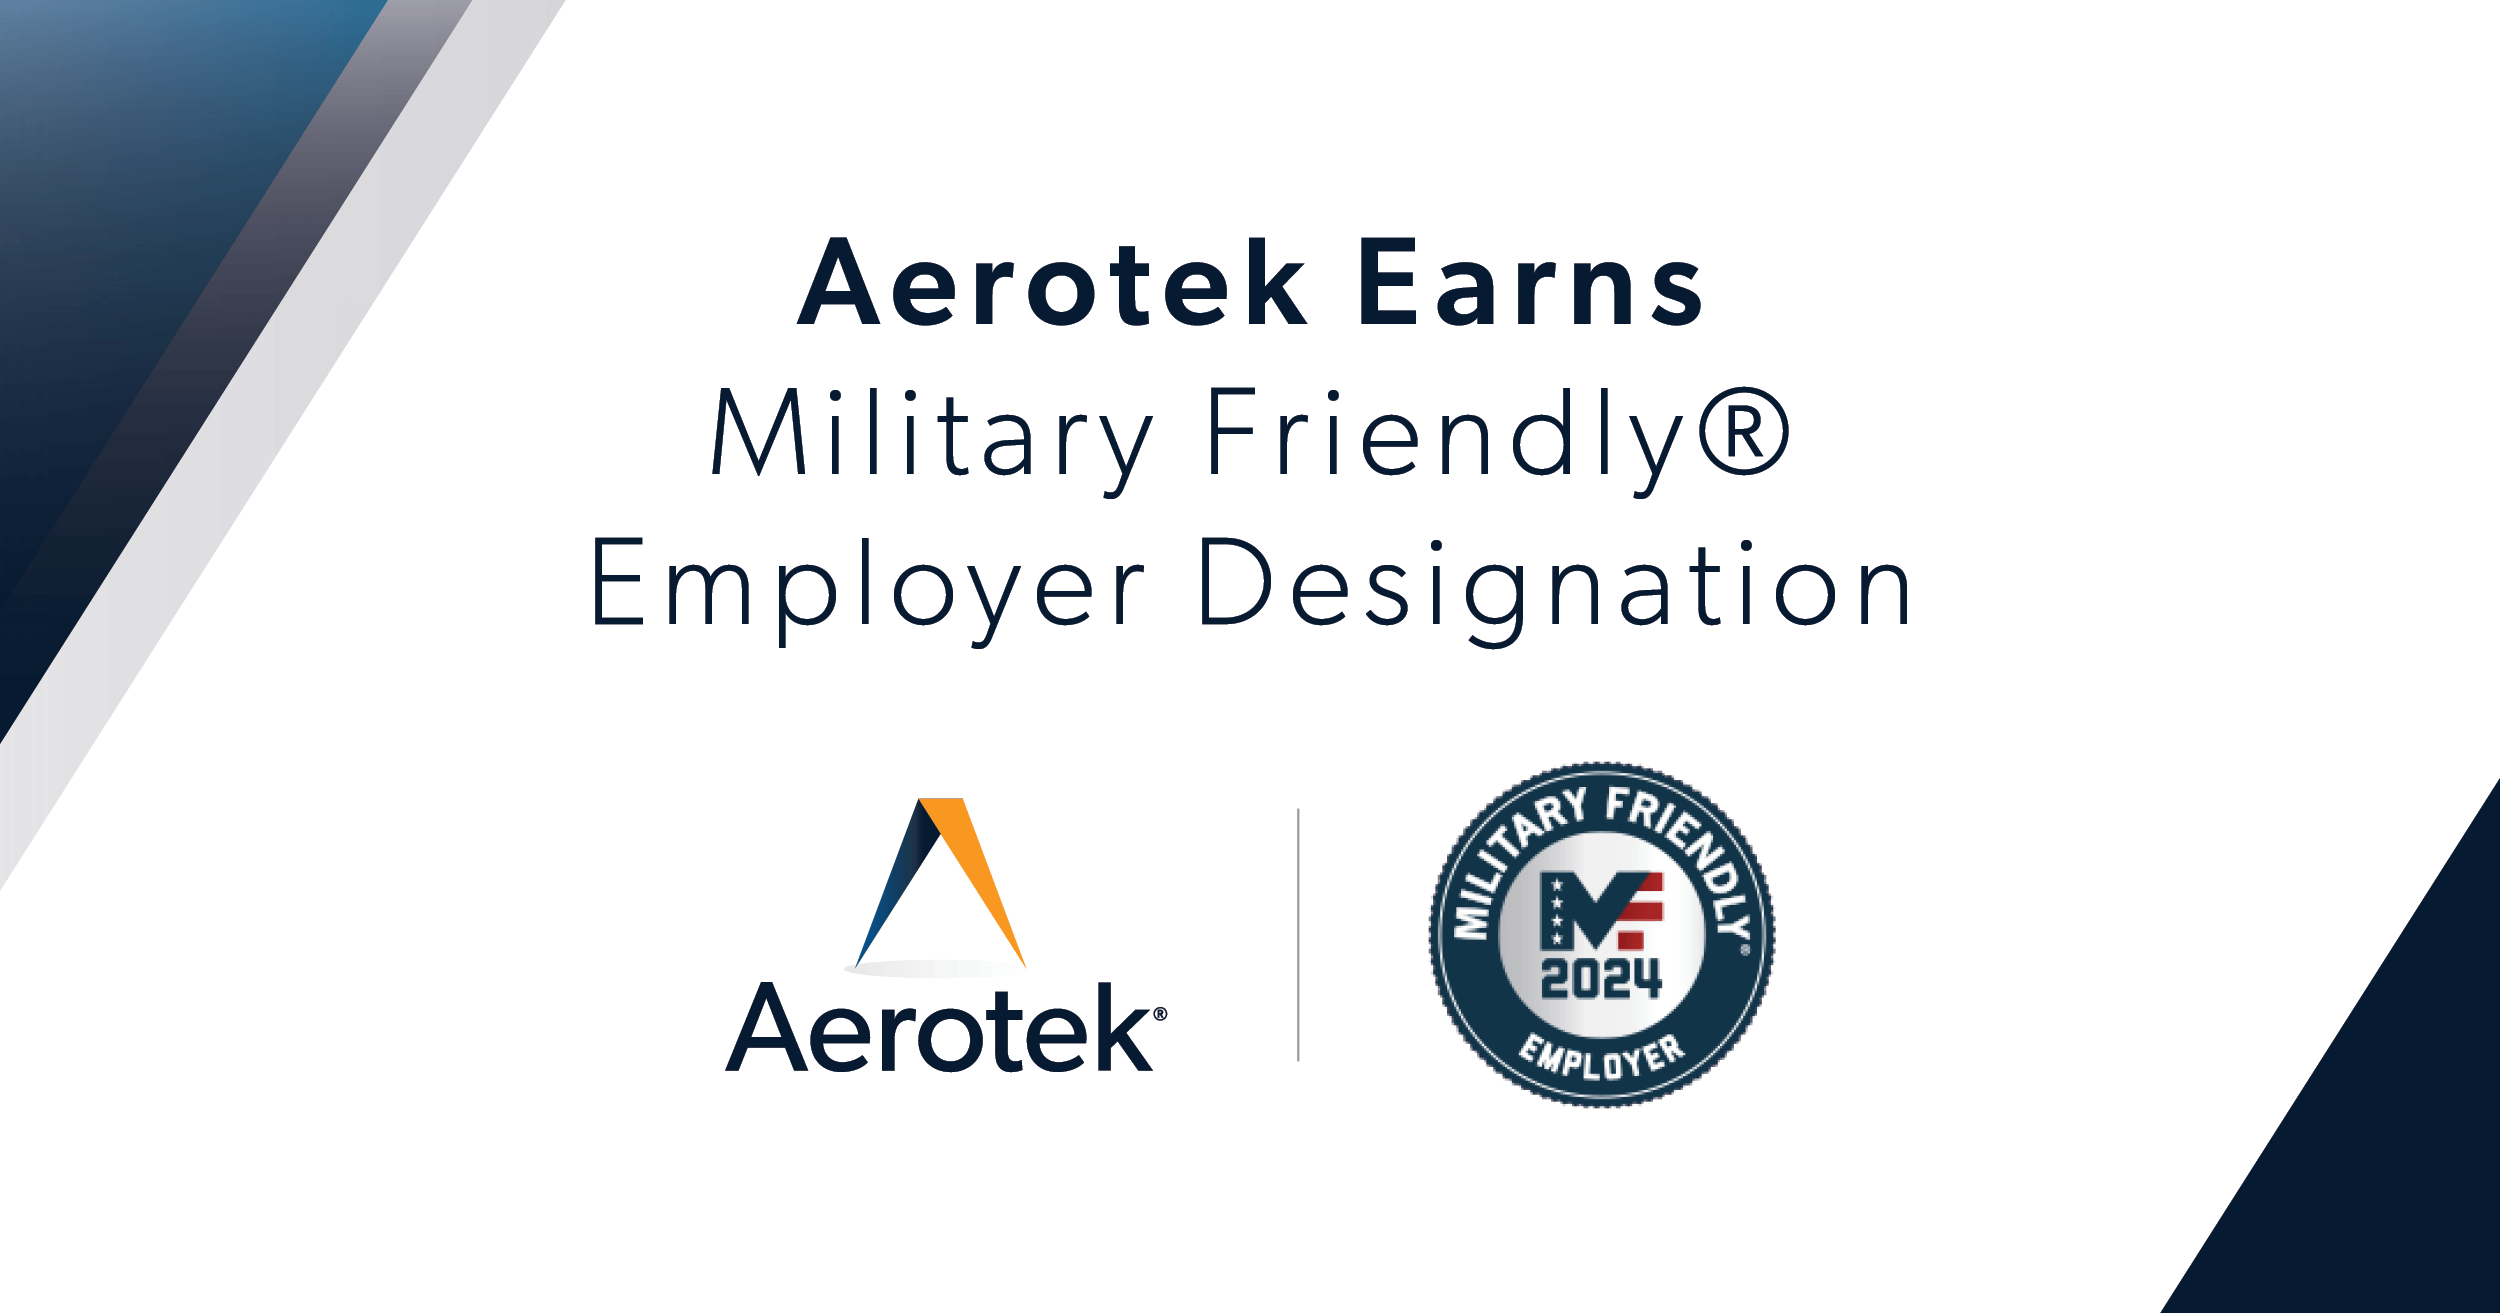 Aerotek has been named a 2024 Military Friendly Employer